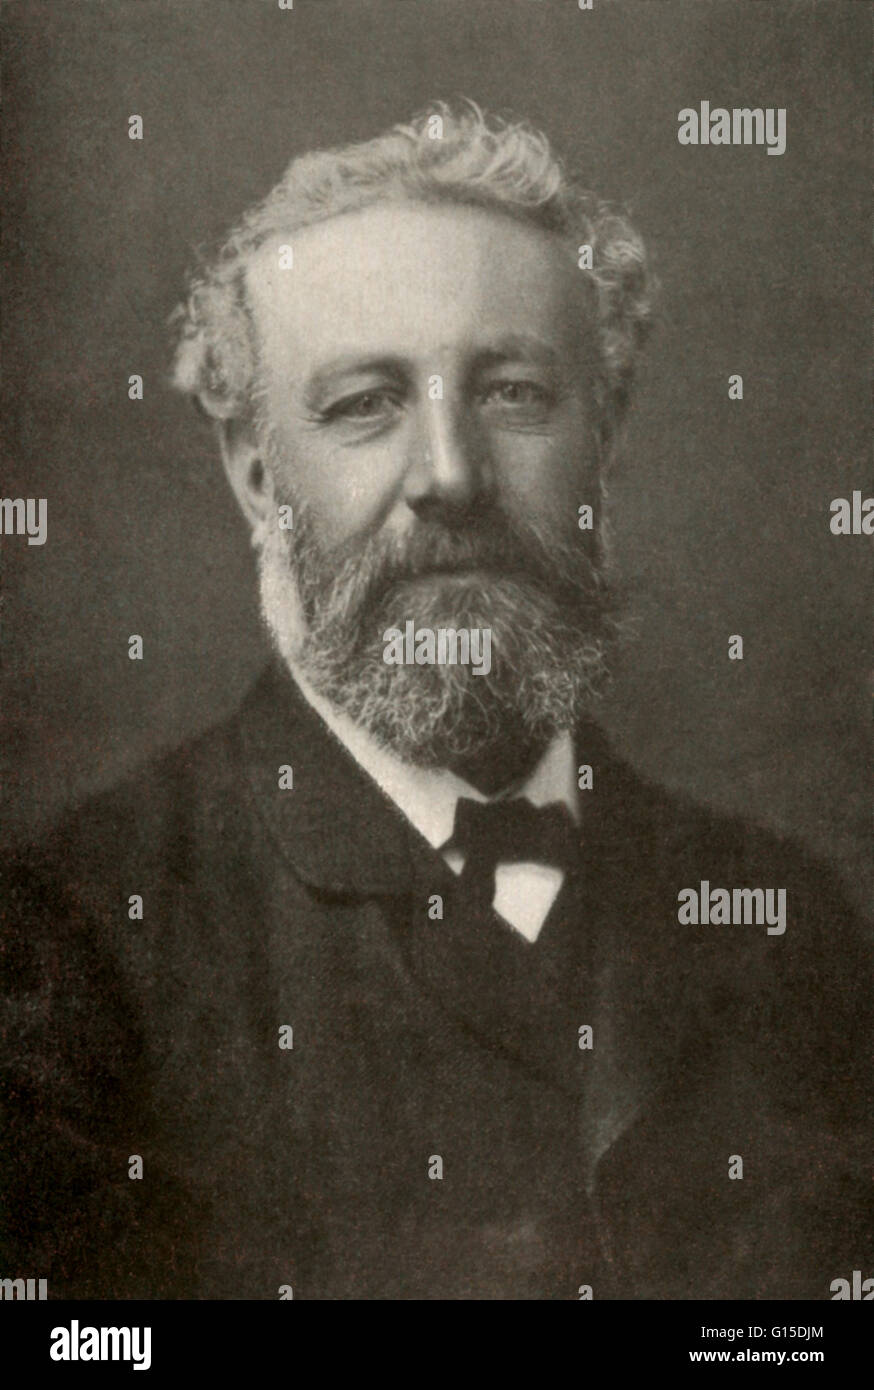 Jules Gabriel Verne (1828-1905) was a French author who pioneered the science fiction genre. He is best known for his novels Twenty Thousand Leagues Under the Sea (1870), A Journey to the Center of the Earth (1864), and Around the World in Eighty Days (18 Stock Photo